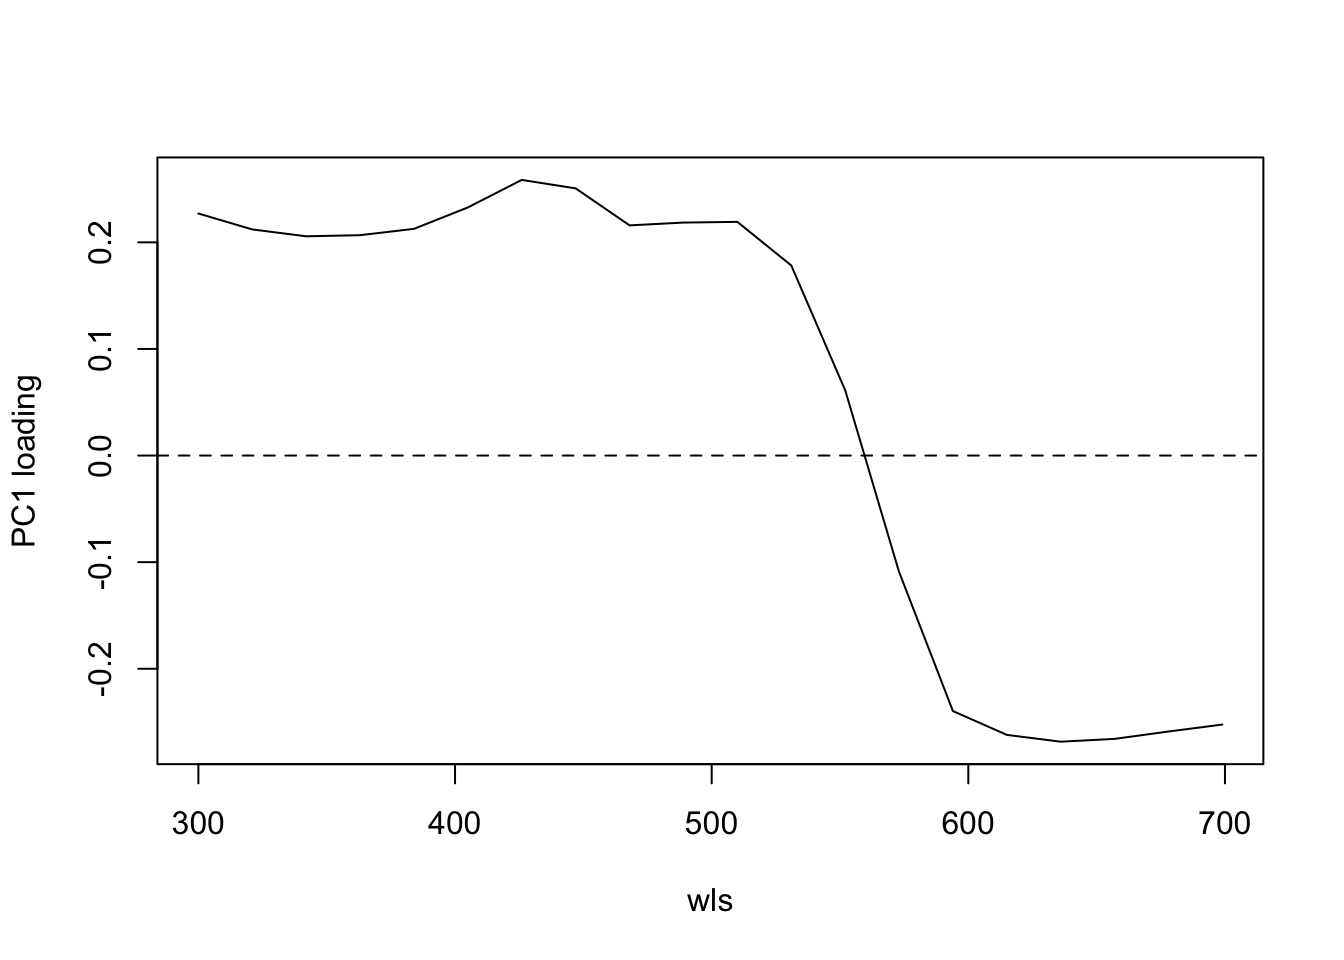 Plot of PC1 loading versus wavelength (left) and species mean spectra sorted vertically from lowest to highest PC1 value (right; values on right hand axis are column identities).